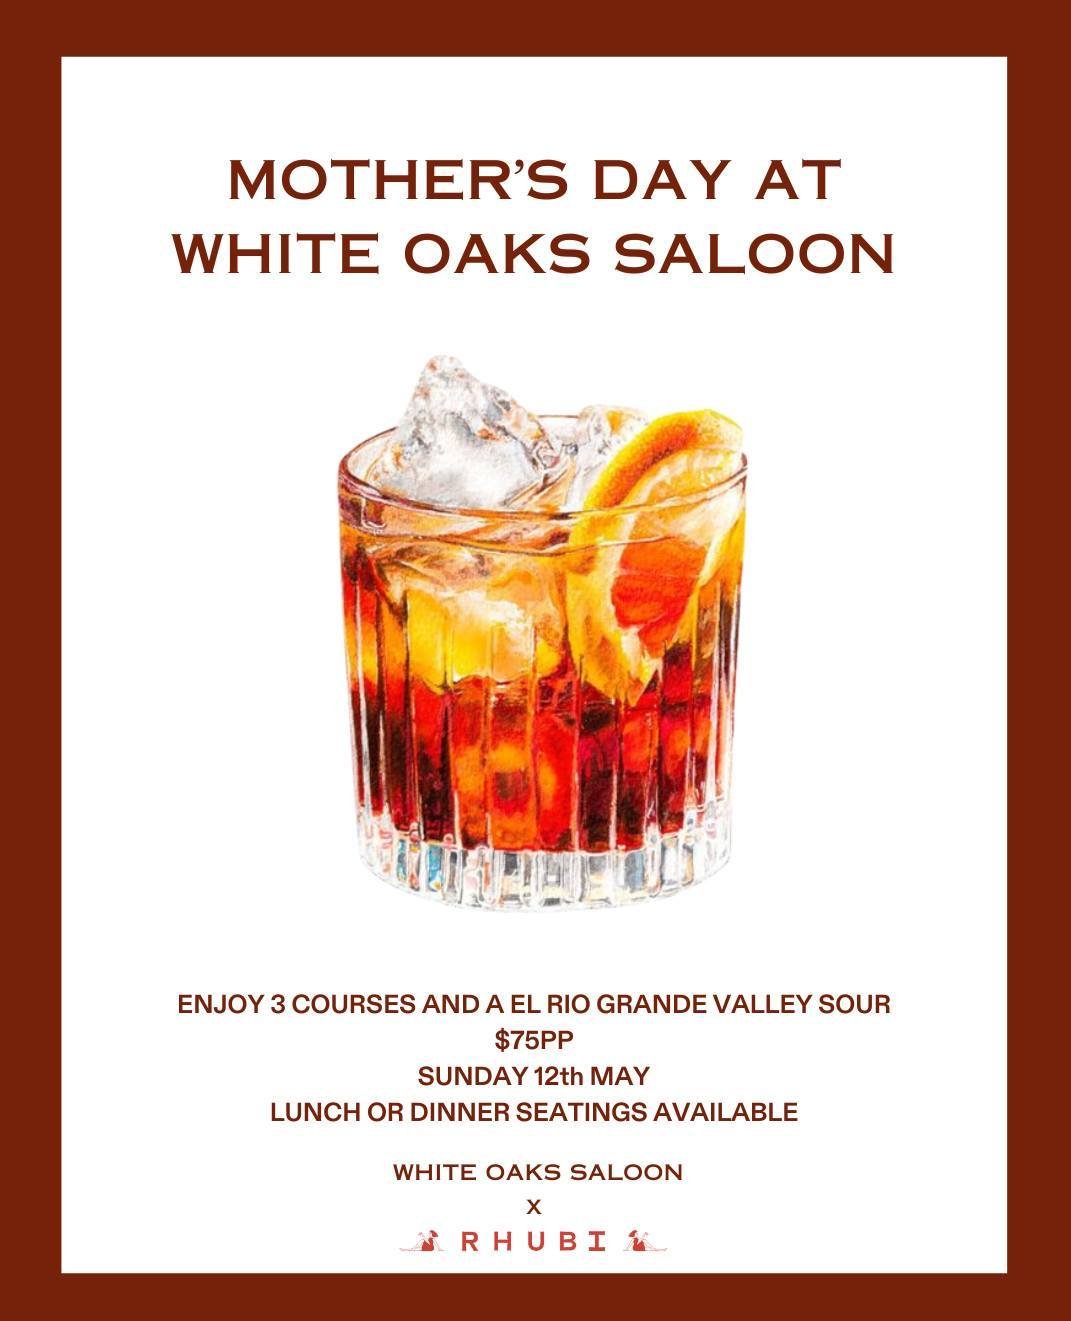 Celebrate Mother's Day with Us | Sunday, May 12th - Mark Your Calendar!⁠
⁠
Join us for an unforgettable Mother's Day celebration at our venue.⁠
⁠
Teaming up with @rhubimistelle, we've prepared a delightful 3-course set menu to tickle your senses. Res